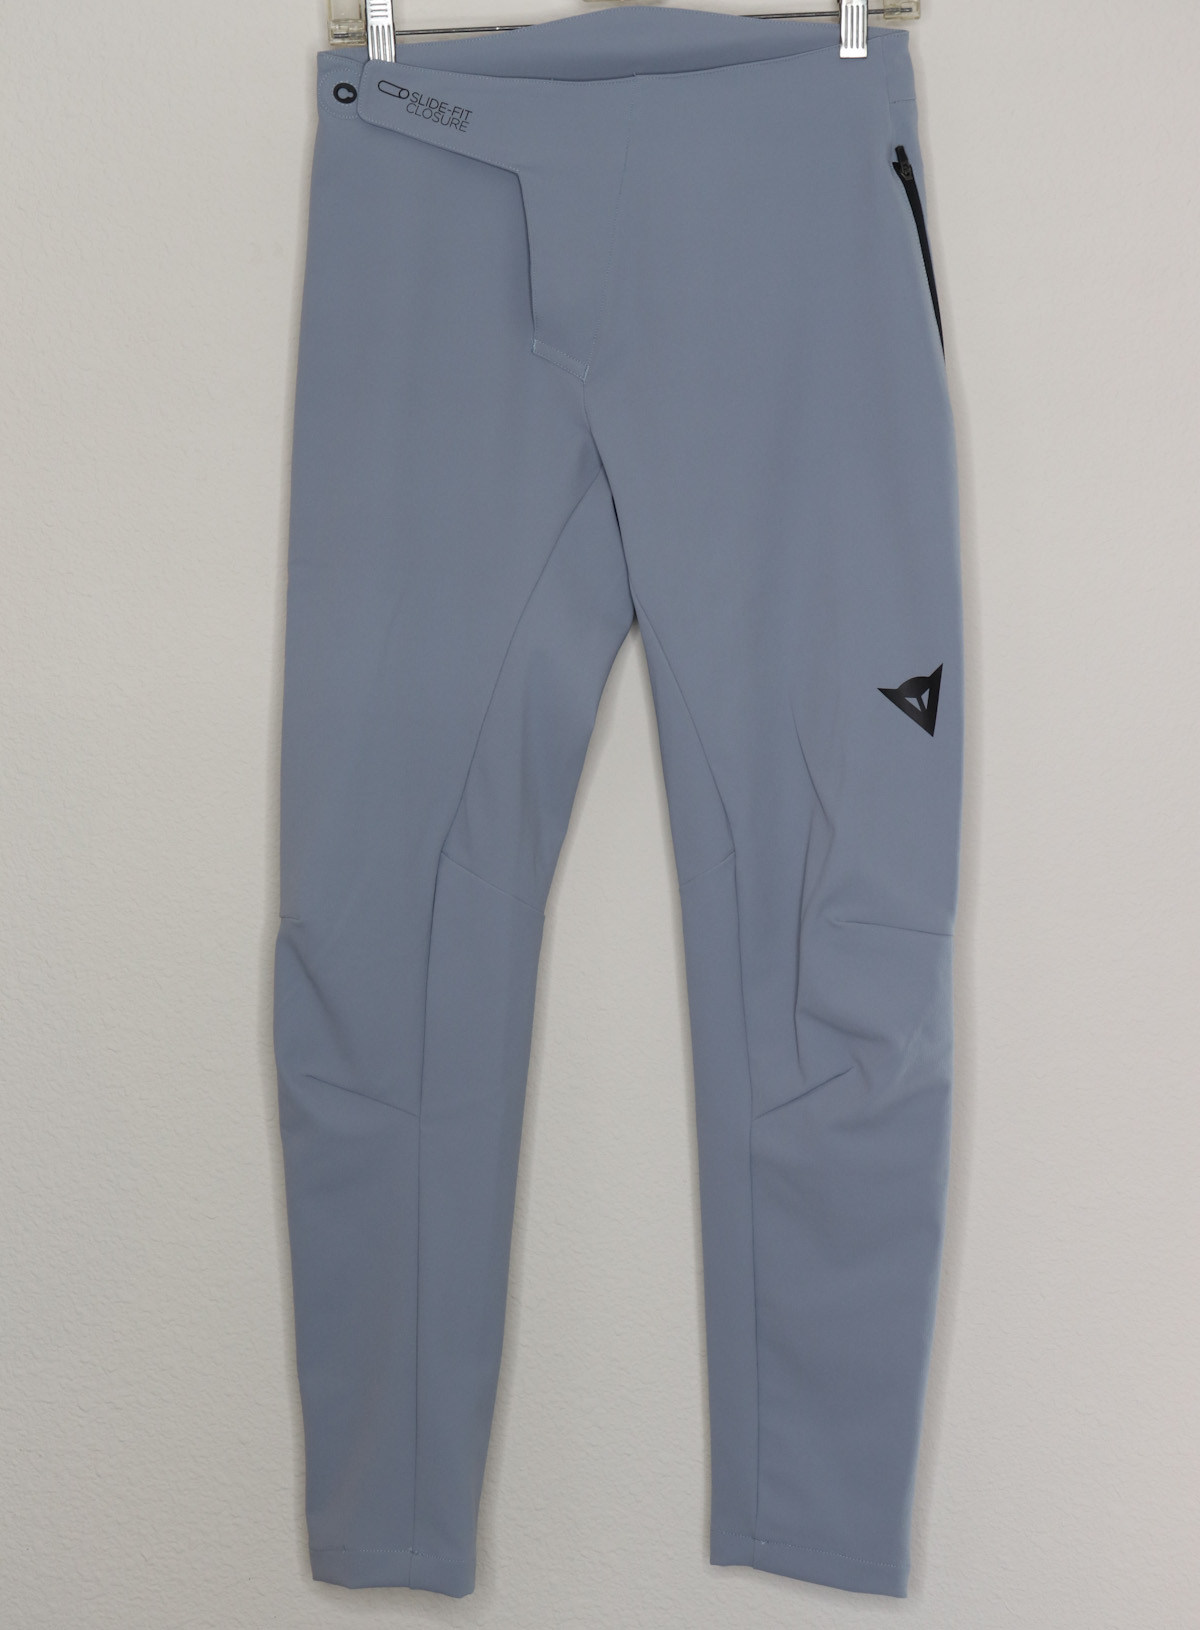 Dainese HGR Pants, front